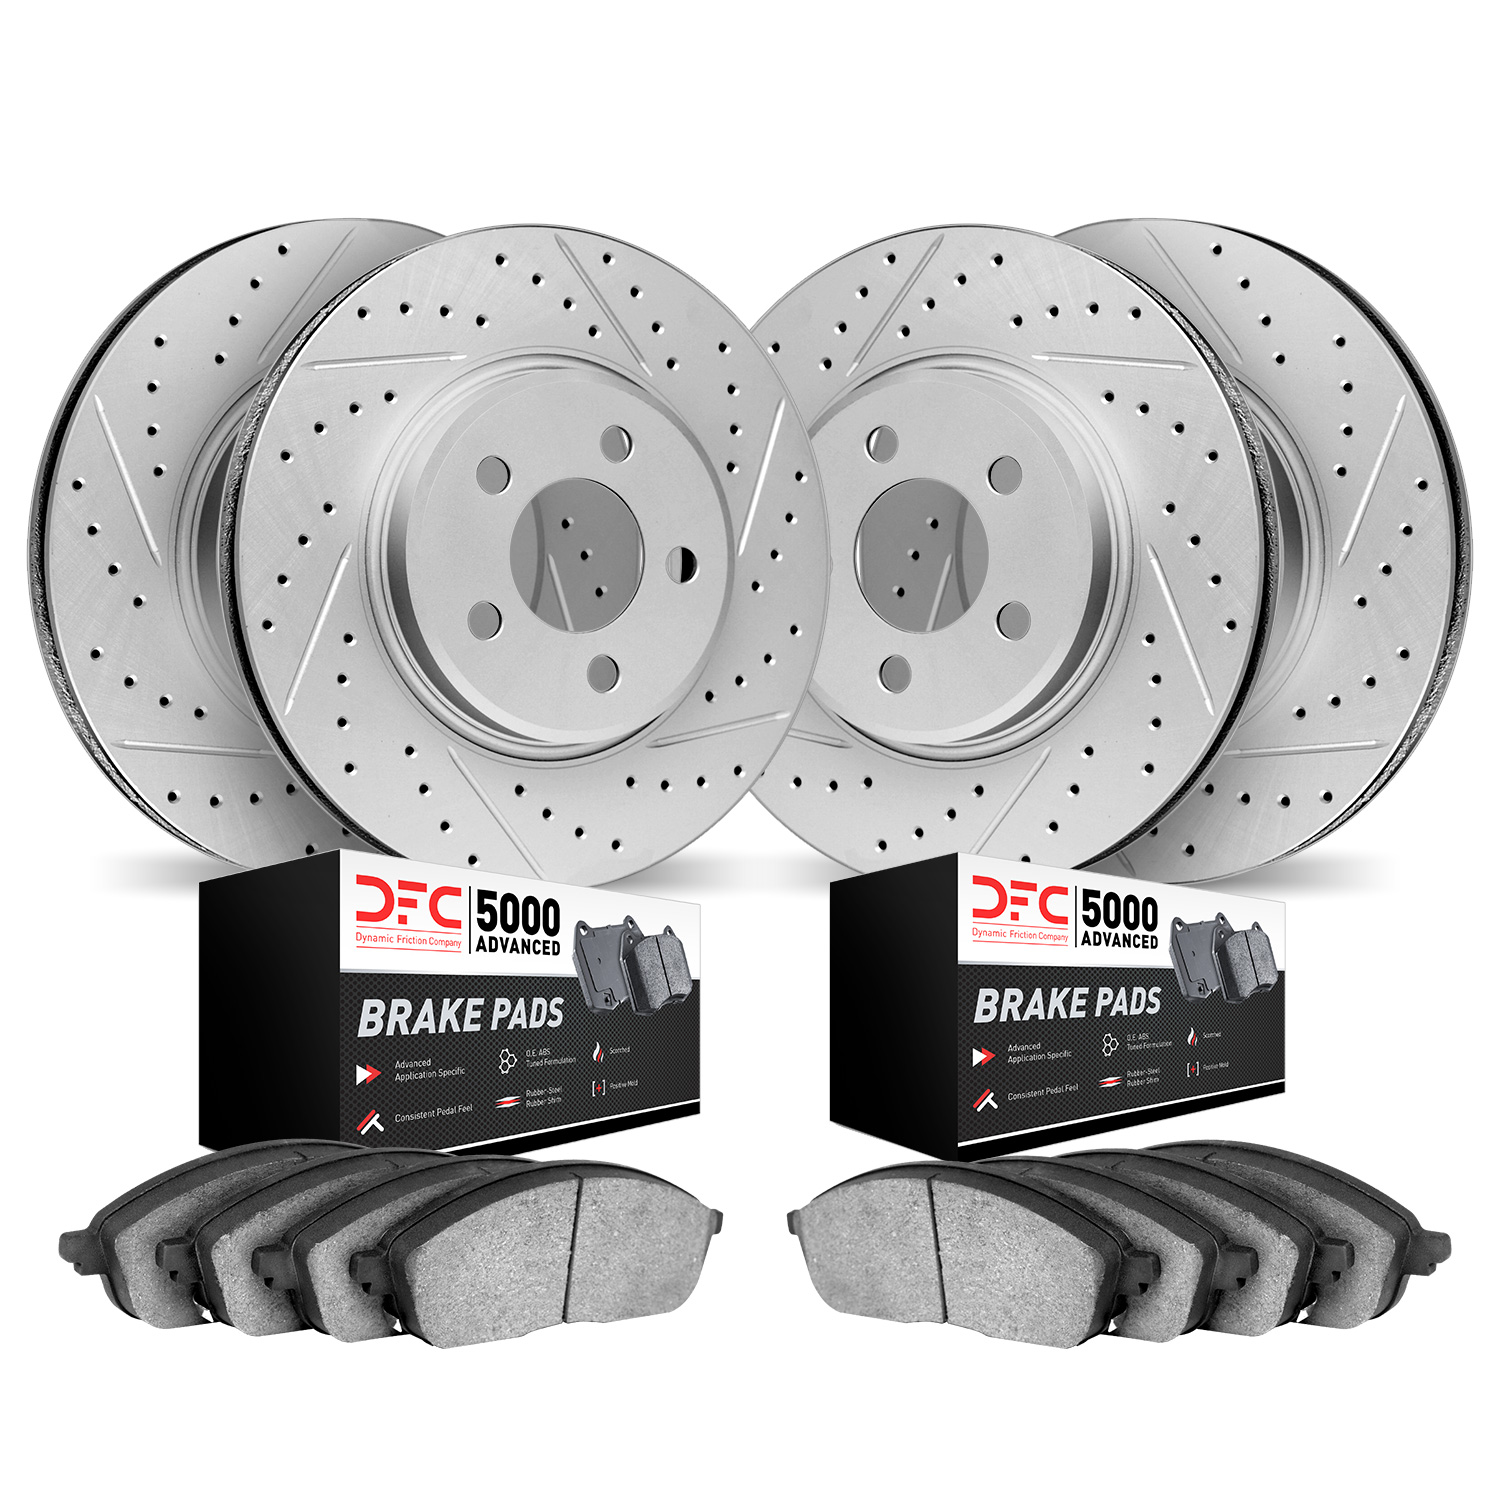 2504-75005 Geoperformance Drilled/Slotted Rotors w/5000 Advanced Brake Pads Kit, 2007-2017 Lexus/Toyota/Scion, Position: Front a